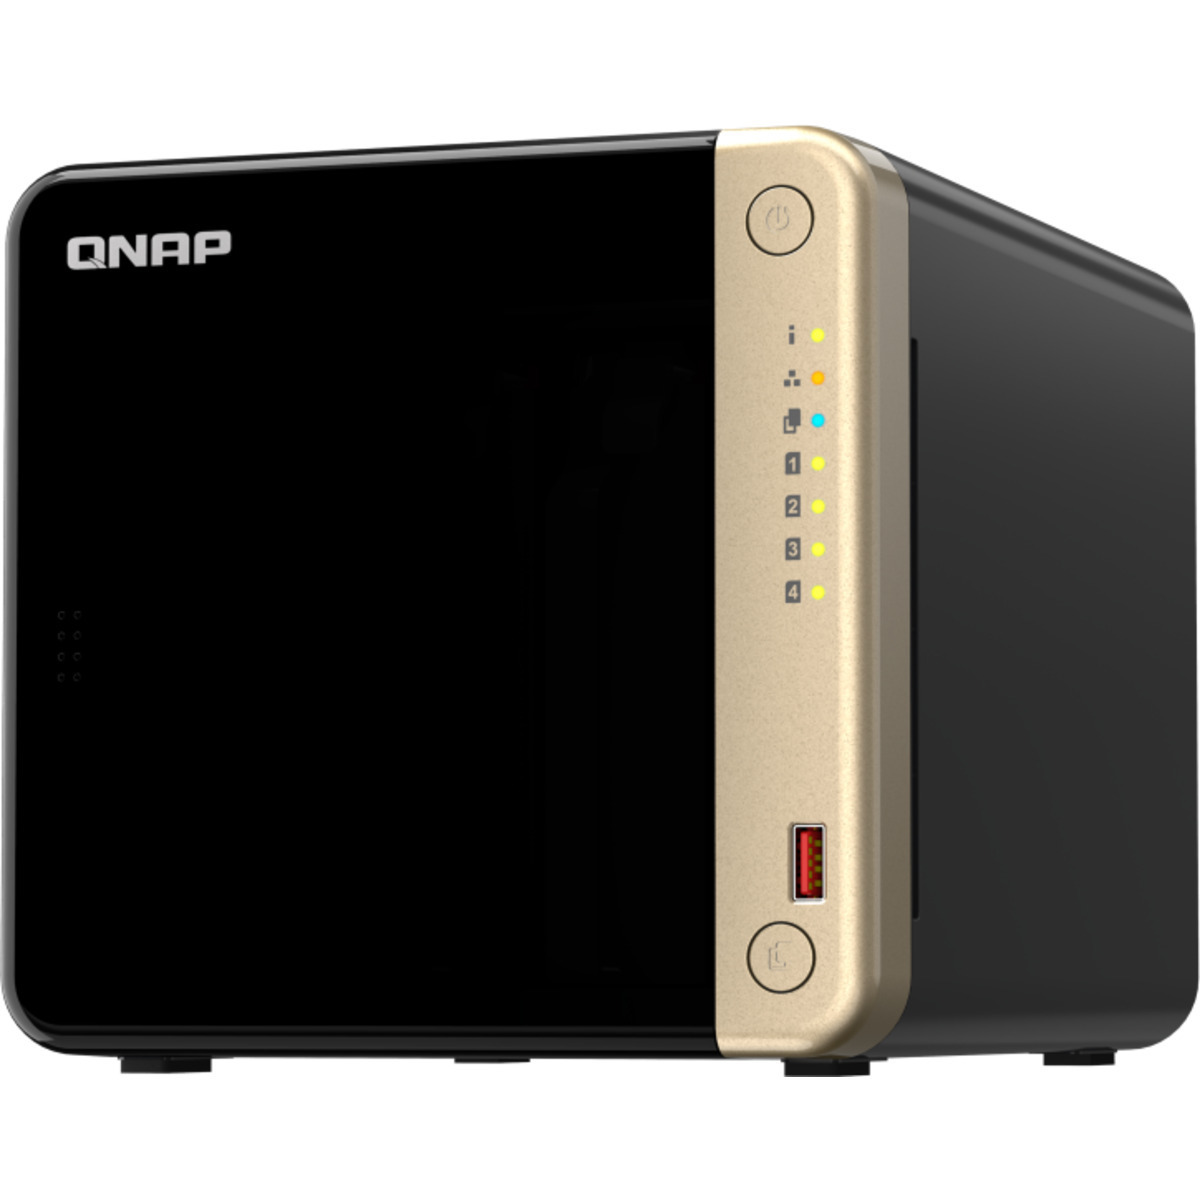 QNAP TS-464 18tb 4-Bay Desktop Multimedia / Power User / Business NAS - Network Attached Storage Device 3x6tb Western Digital Red Plus WD60EFPX 3.5 5640rpm SATA 6Gb/s HDD NAS Class Drives Installed - Burn-In Tested TS-464